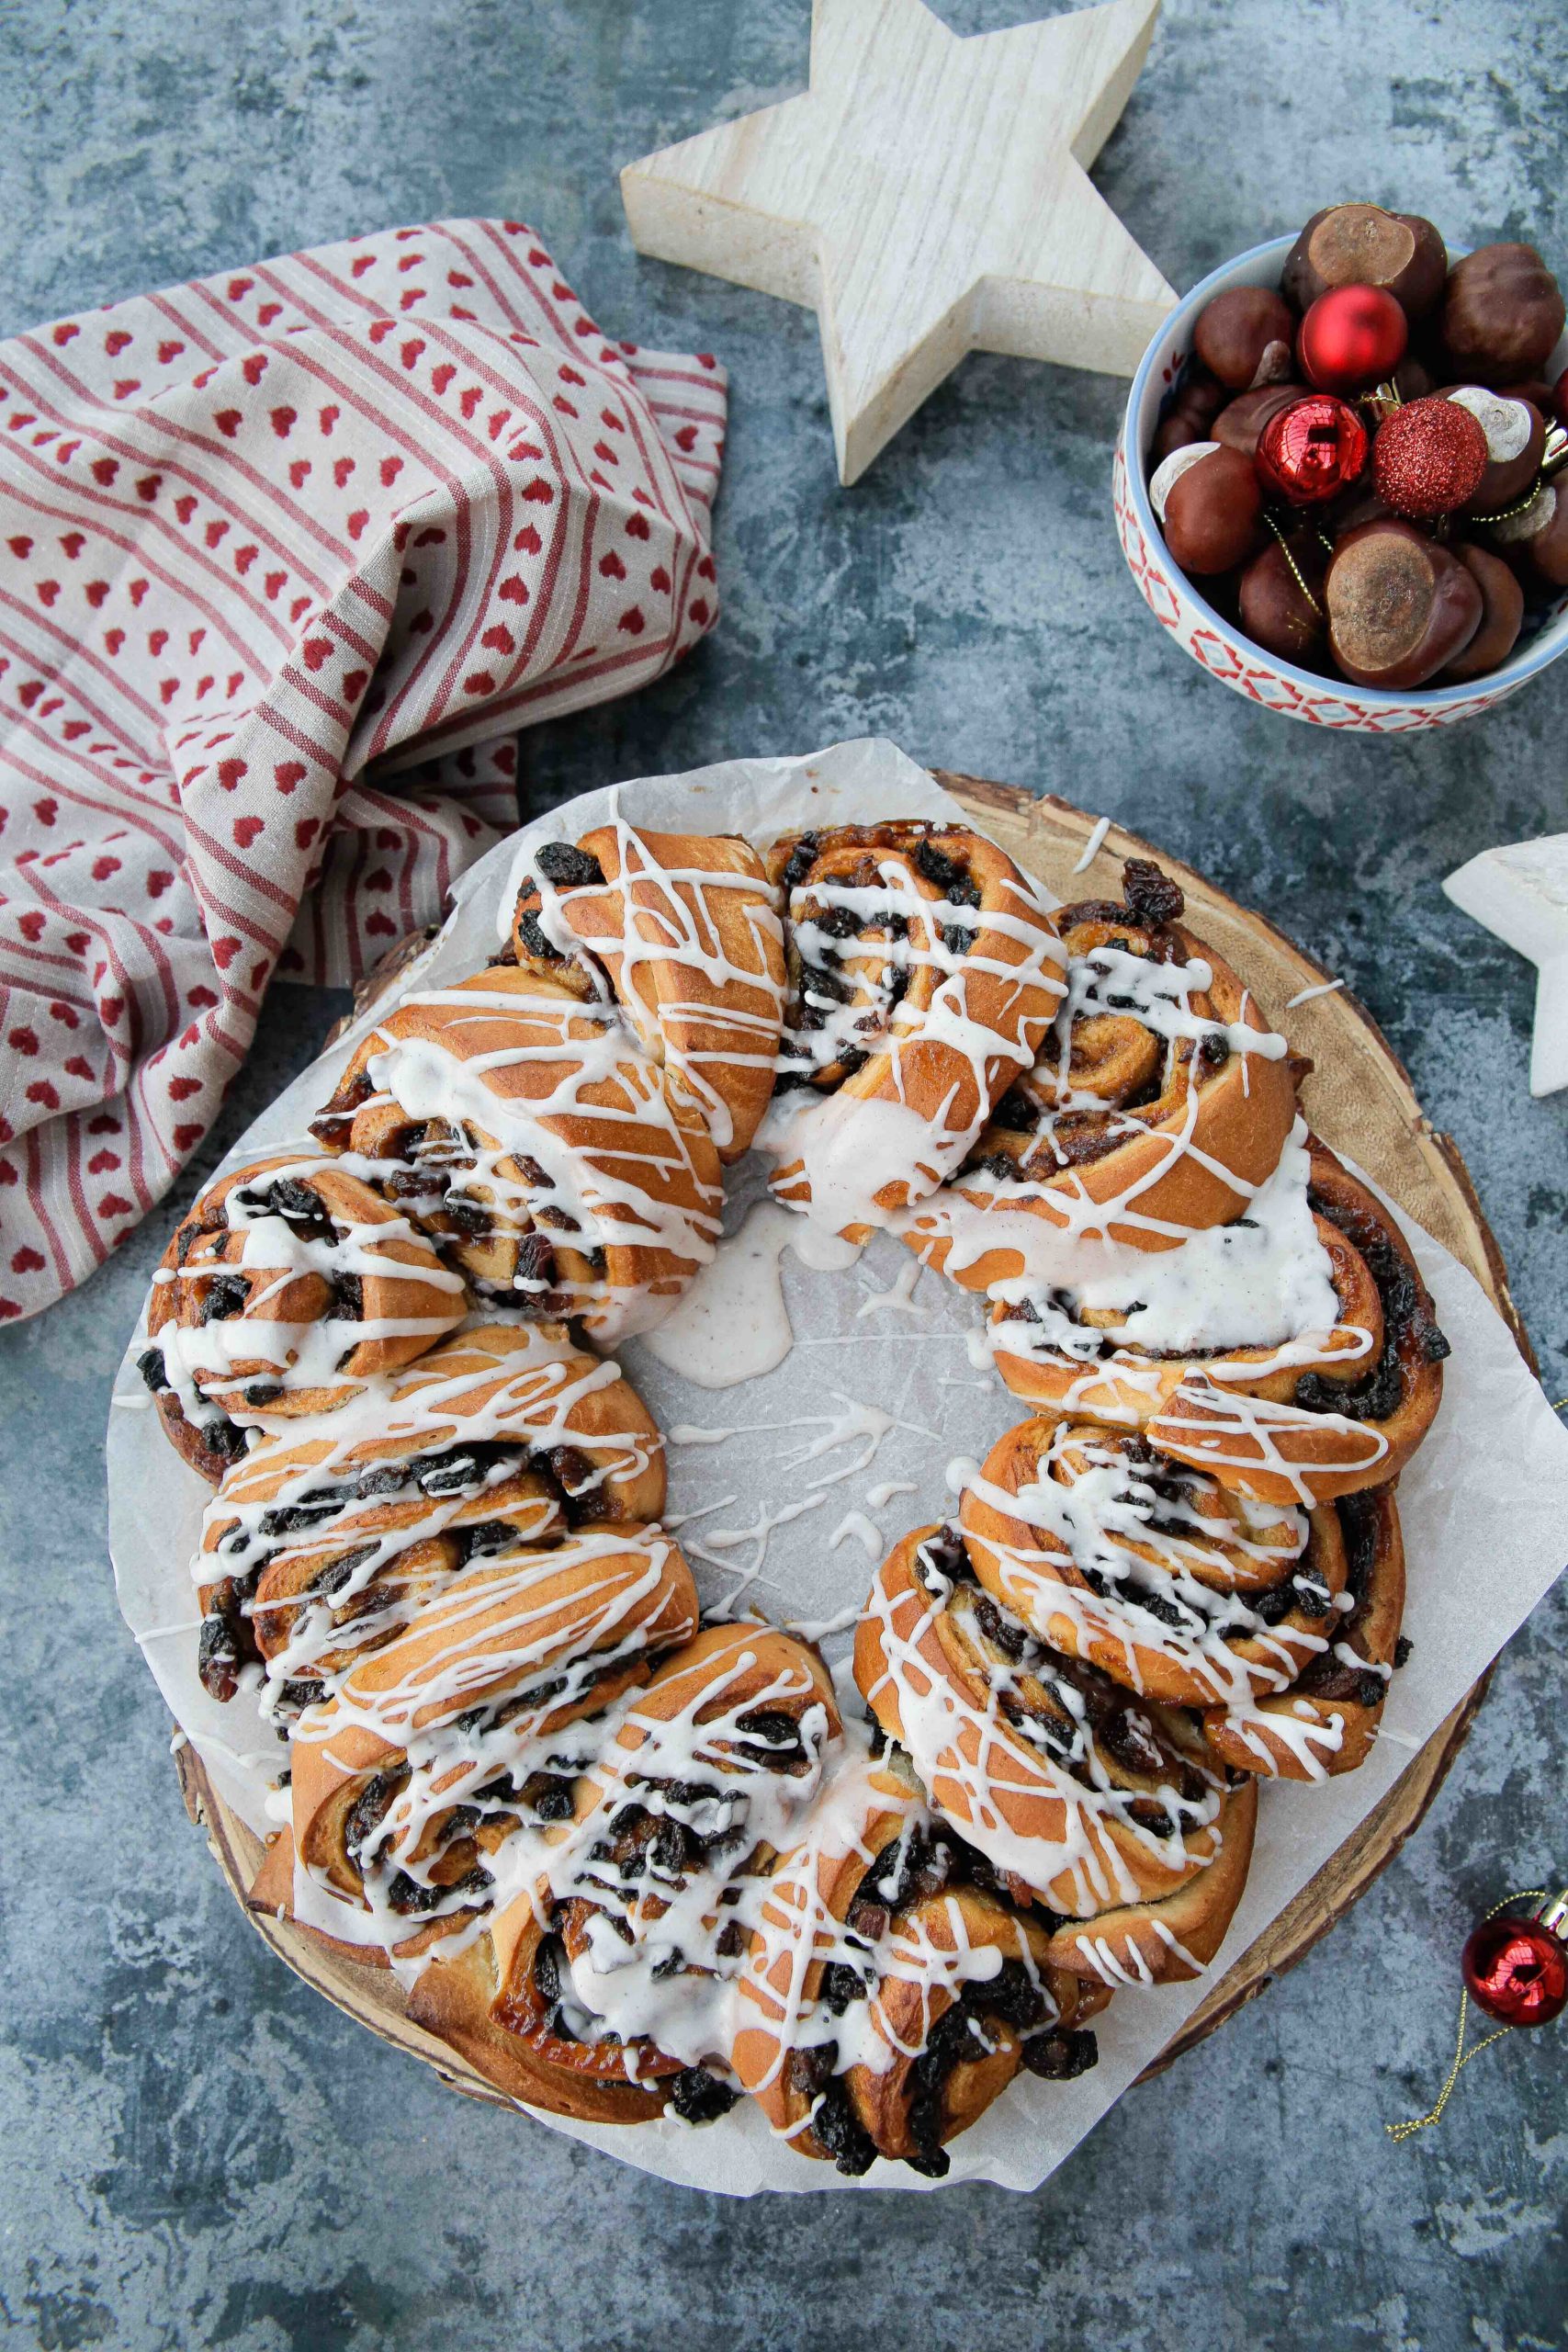 An impressive but simple to make Christmas mincemeat wreath filled with festive flavours! Perfect for the whole family to enjoy with a hot beverage, mulled wine or a dollop of cream or custard! | Recipe on thecookandhim.com #mincemeat #veganchristmasfood #veganchristmasrecipe #christmasbreakfast #homemadebread #mincemeatwreath